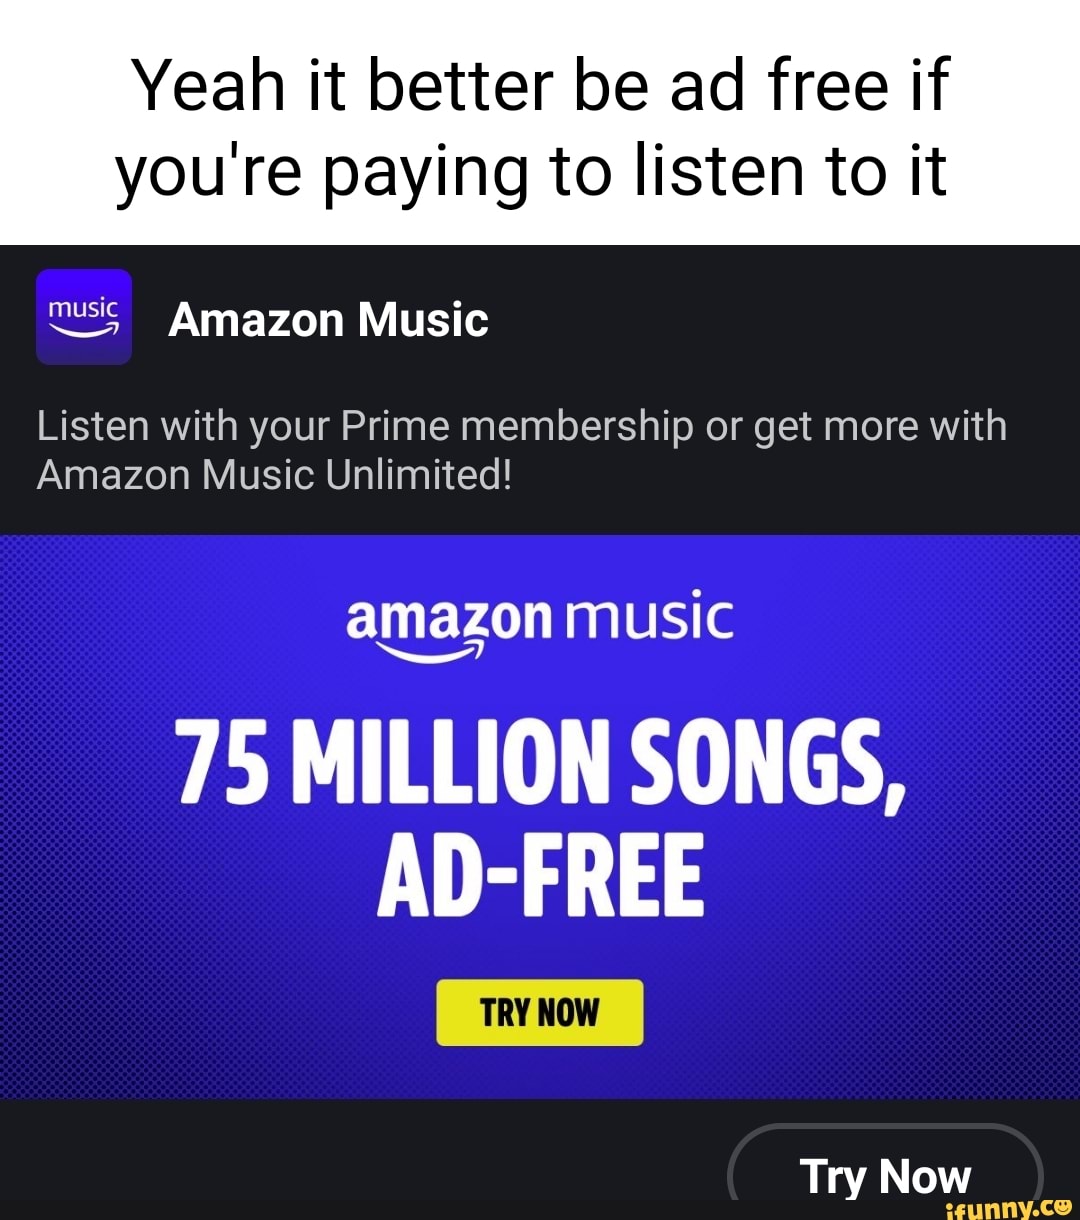 do you get amazon music unlimited with prime membership